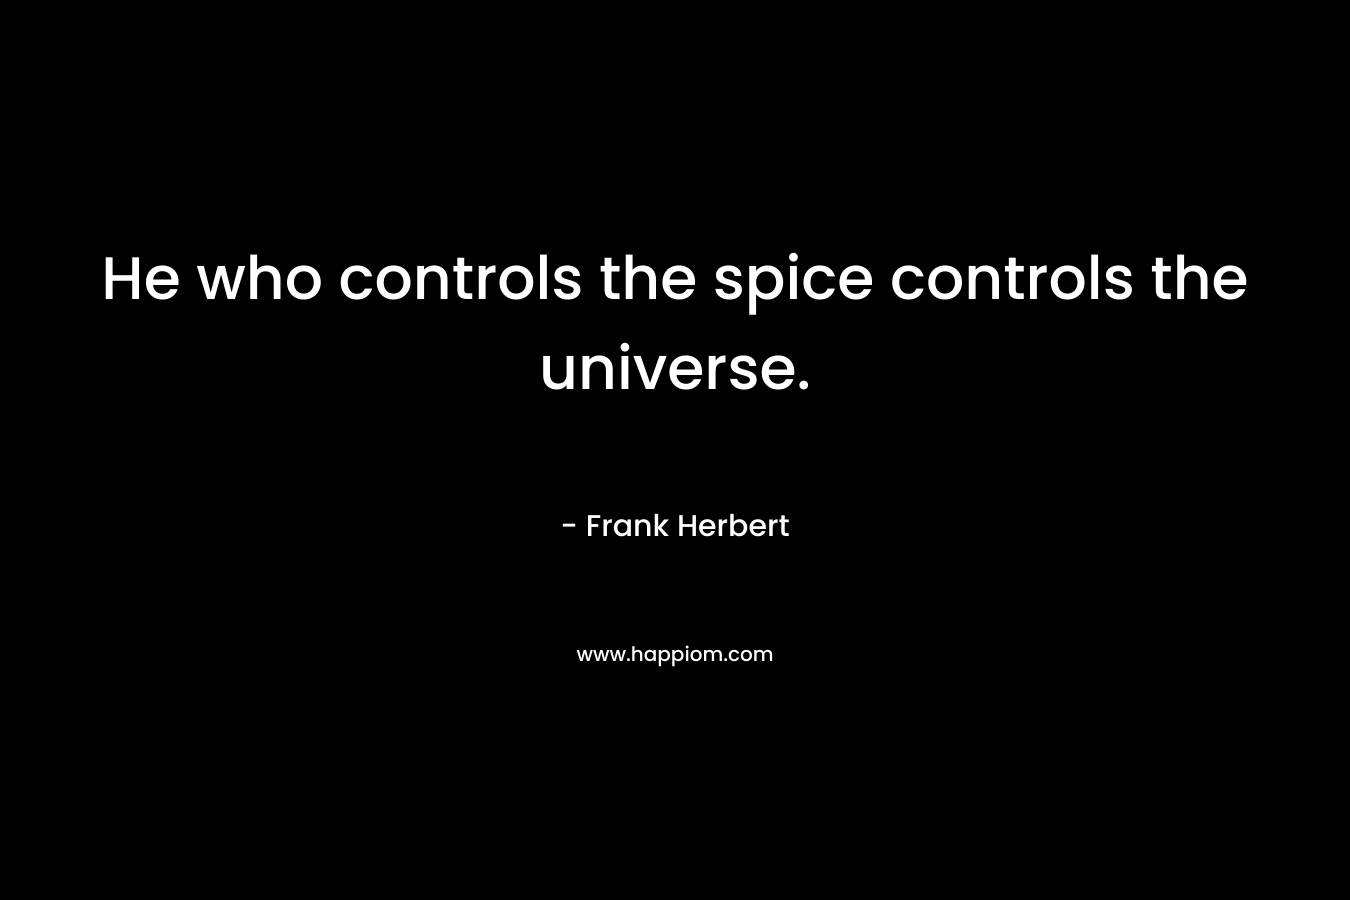 He who controls the spice controls the universe.